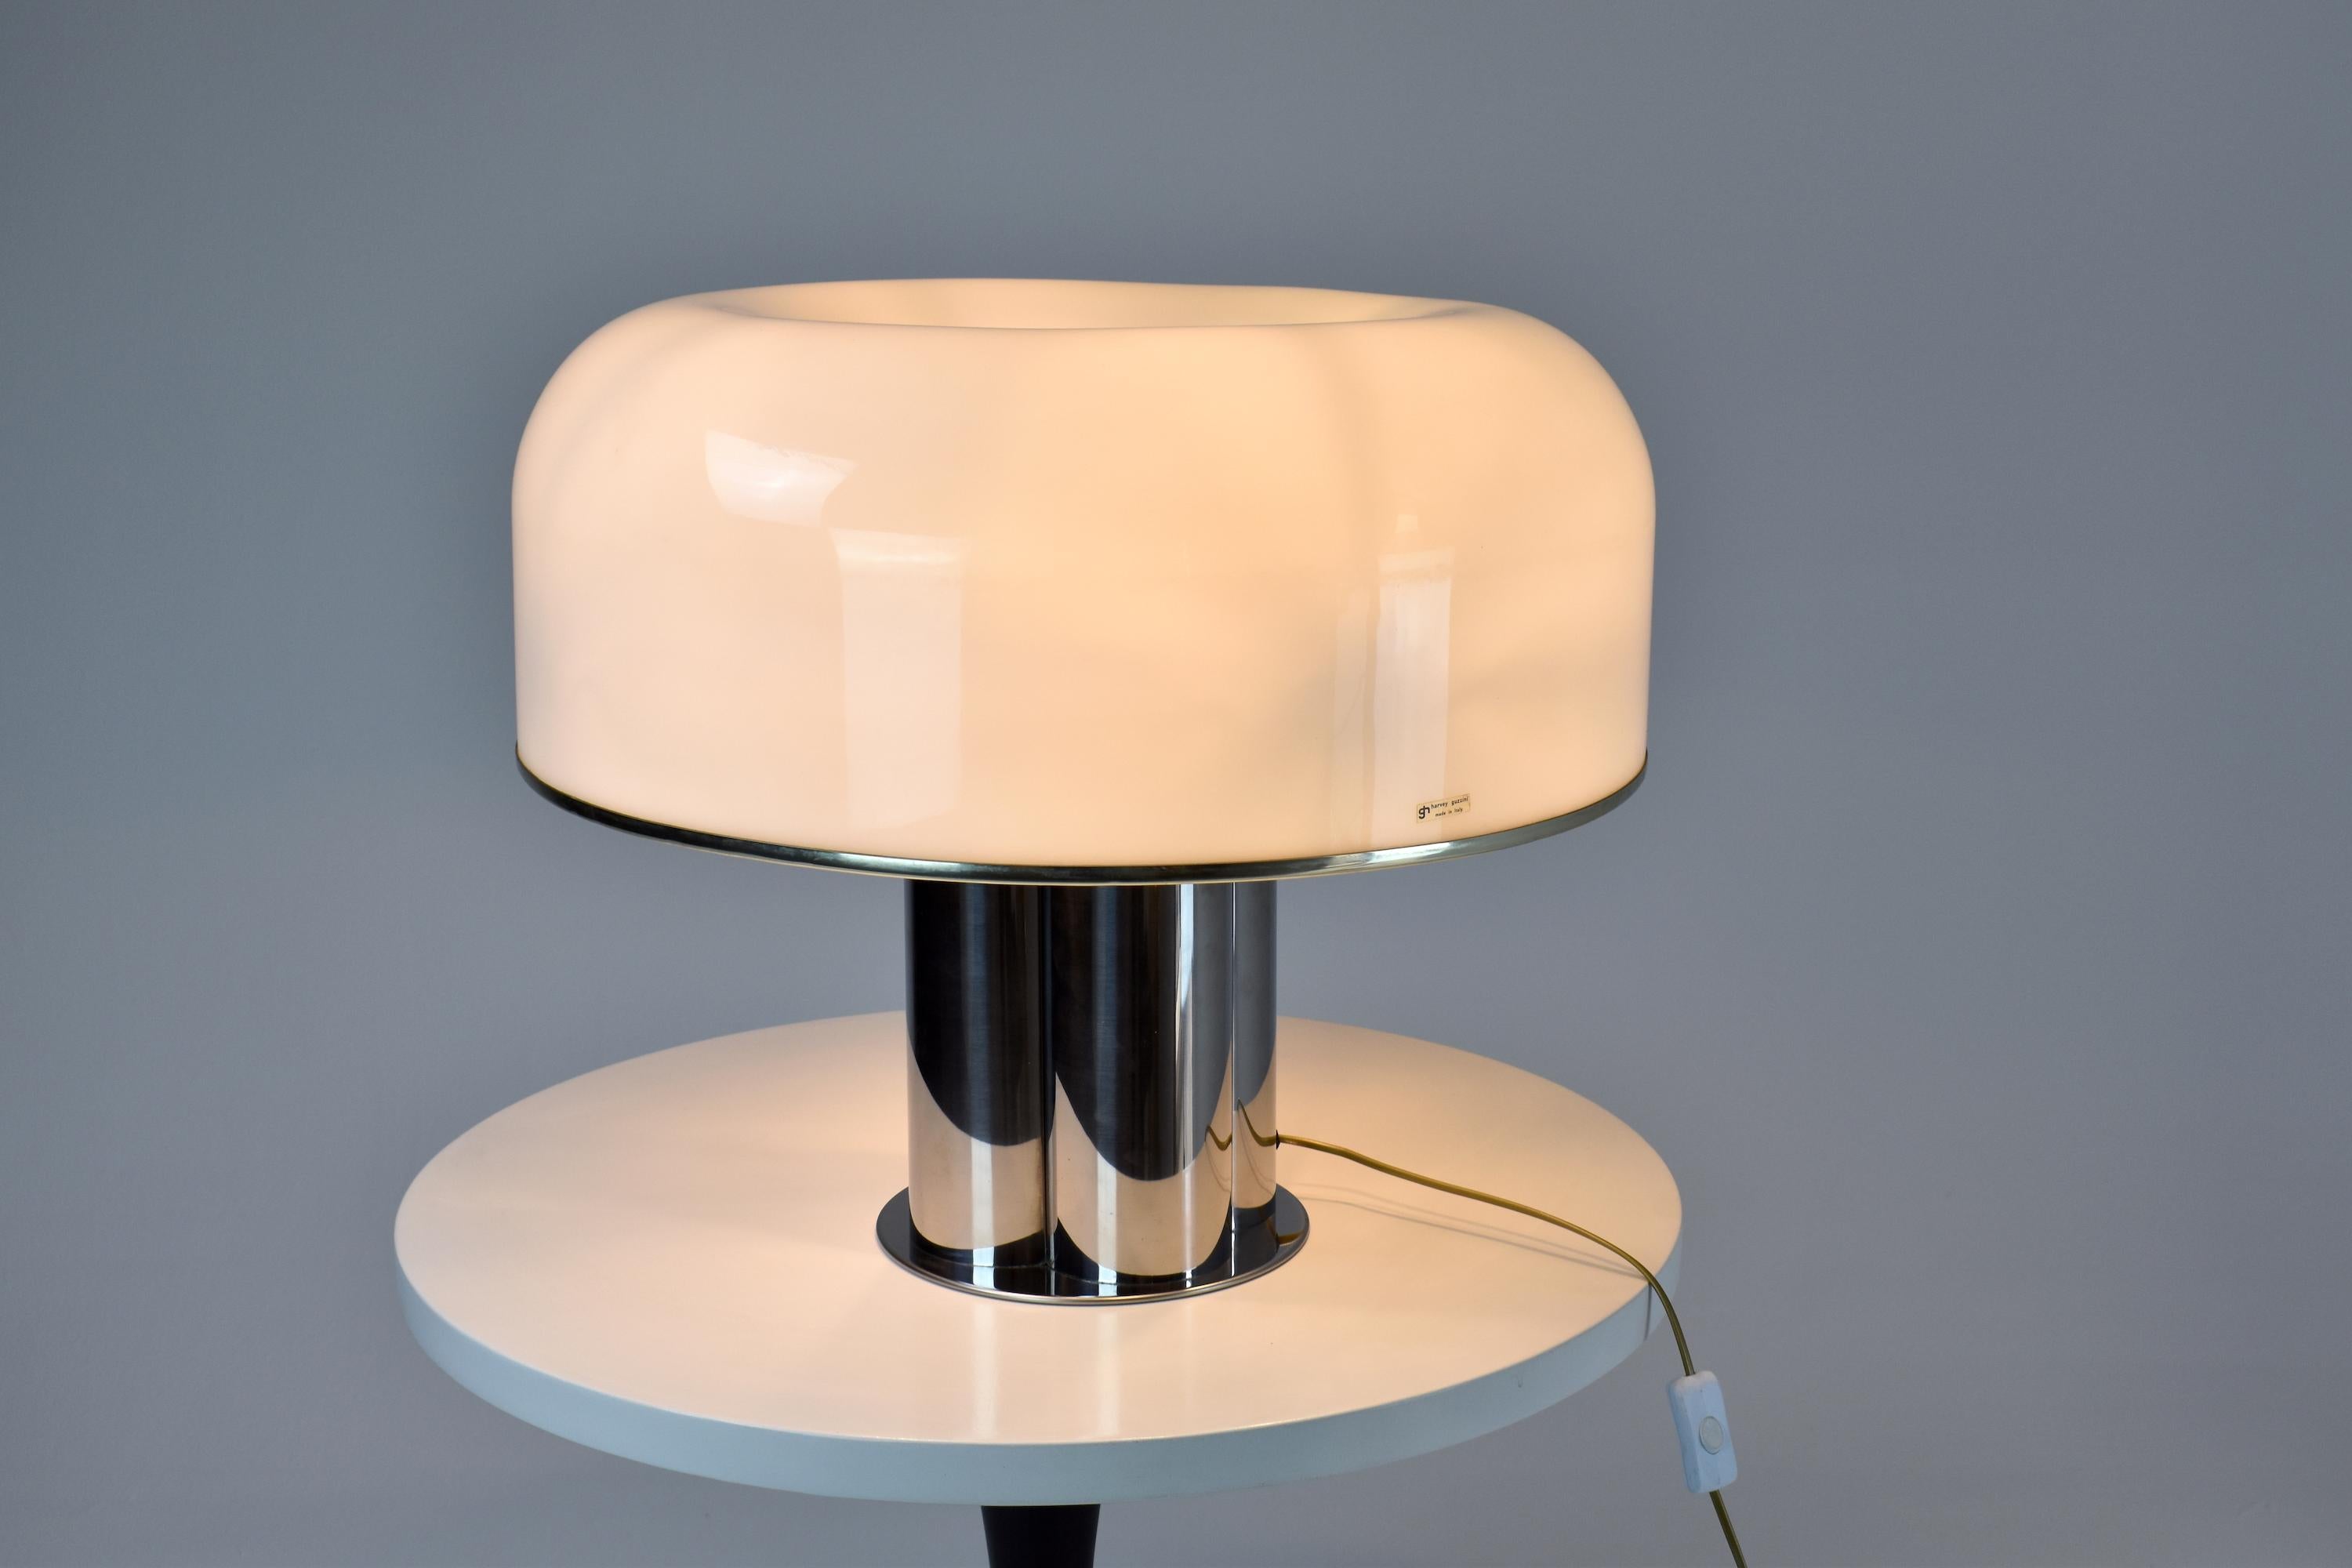 A fantastic 20th-century vintage Italian massive table lamp in mushroom space-age style by Harvey Guzzini (labeled). Impressively crafted with an organic-shaped white plastic shade with chic chrome edges and a large supporting structure.